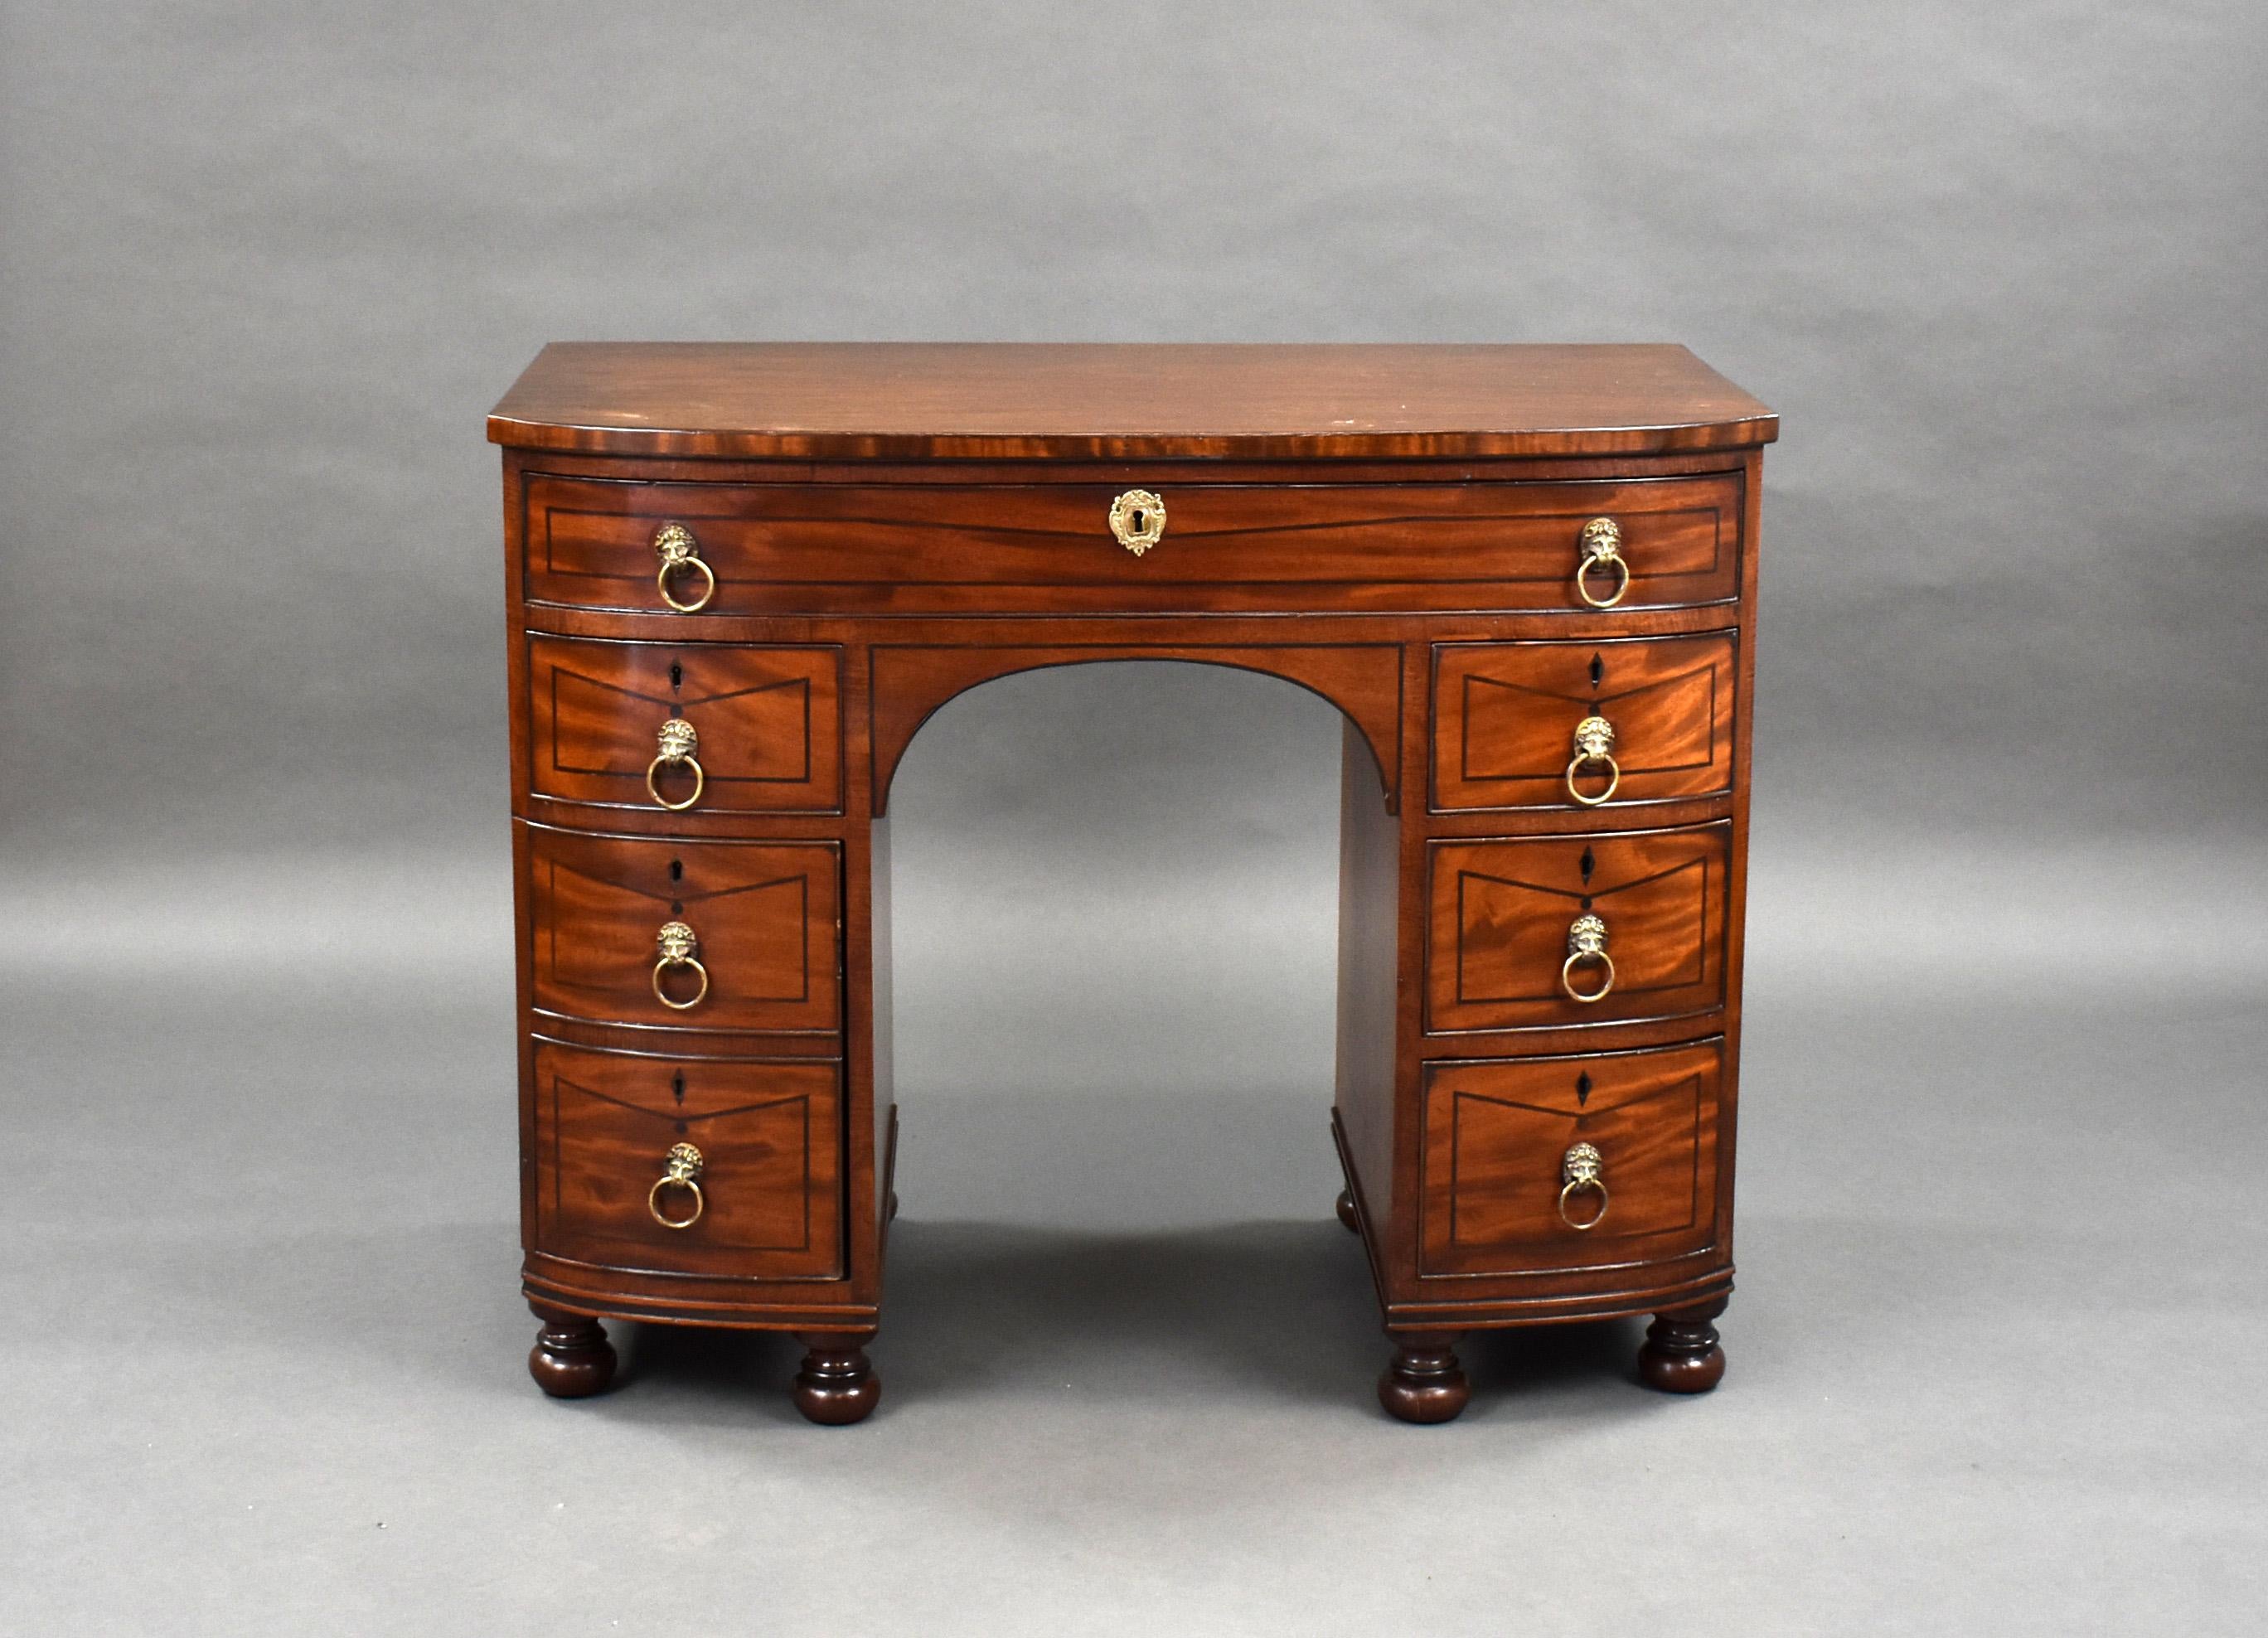 19th Century English Regency Period Mahogany Gentleman's Dressing Chest In Good Condition For Sale In Chelmsford, Essex